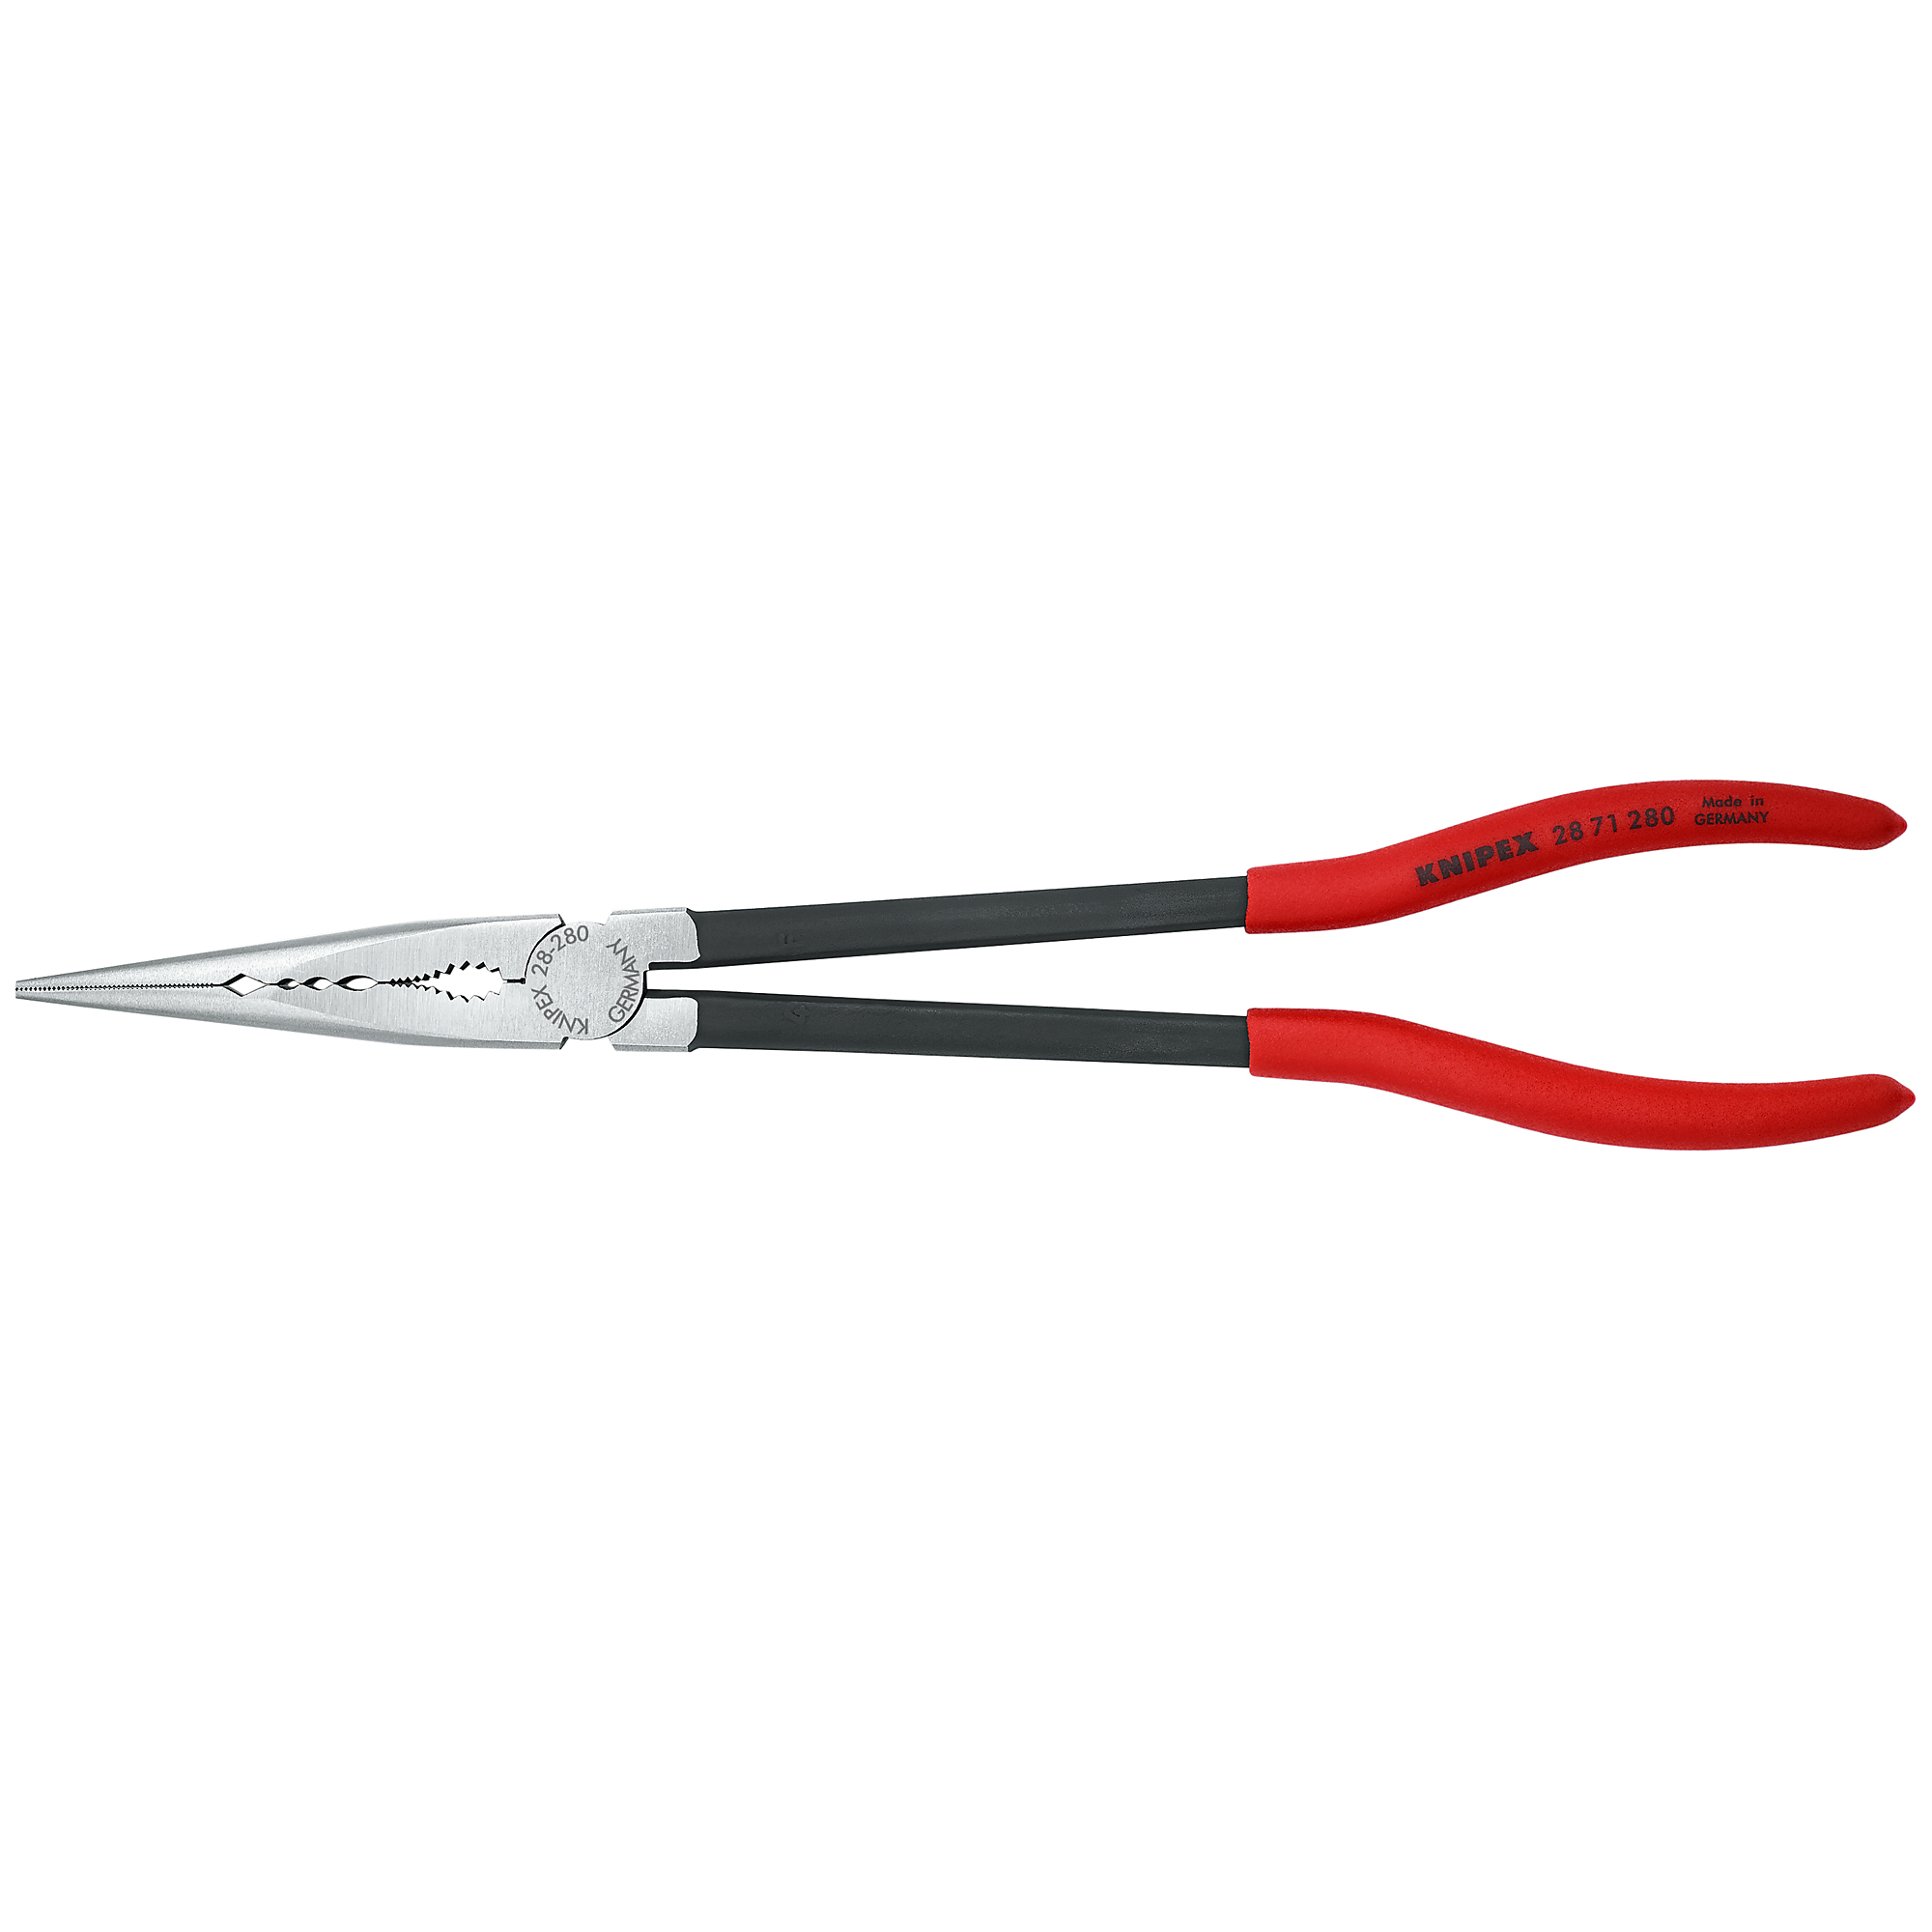 KNIPEX, XL Needle-Nose Pliers-Straight Jaws, Bulk, 11Inch, Pieces (qty.) 1 Material Steel, Model 28 71 280